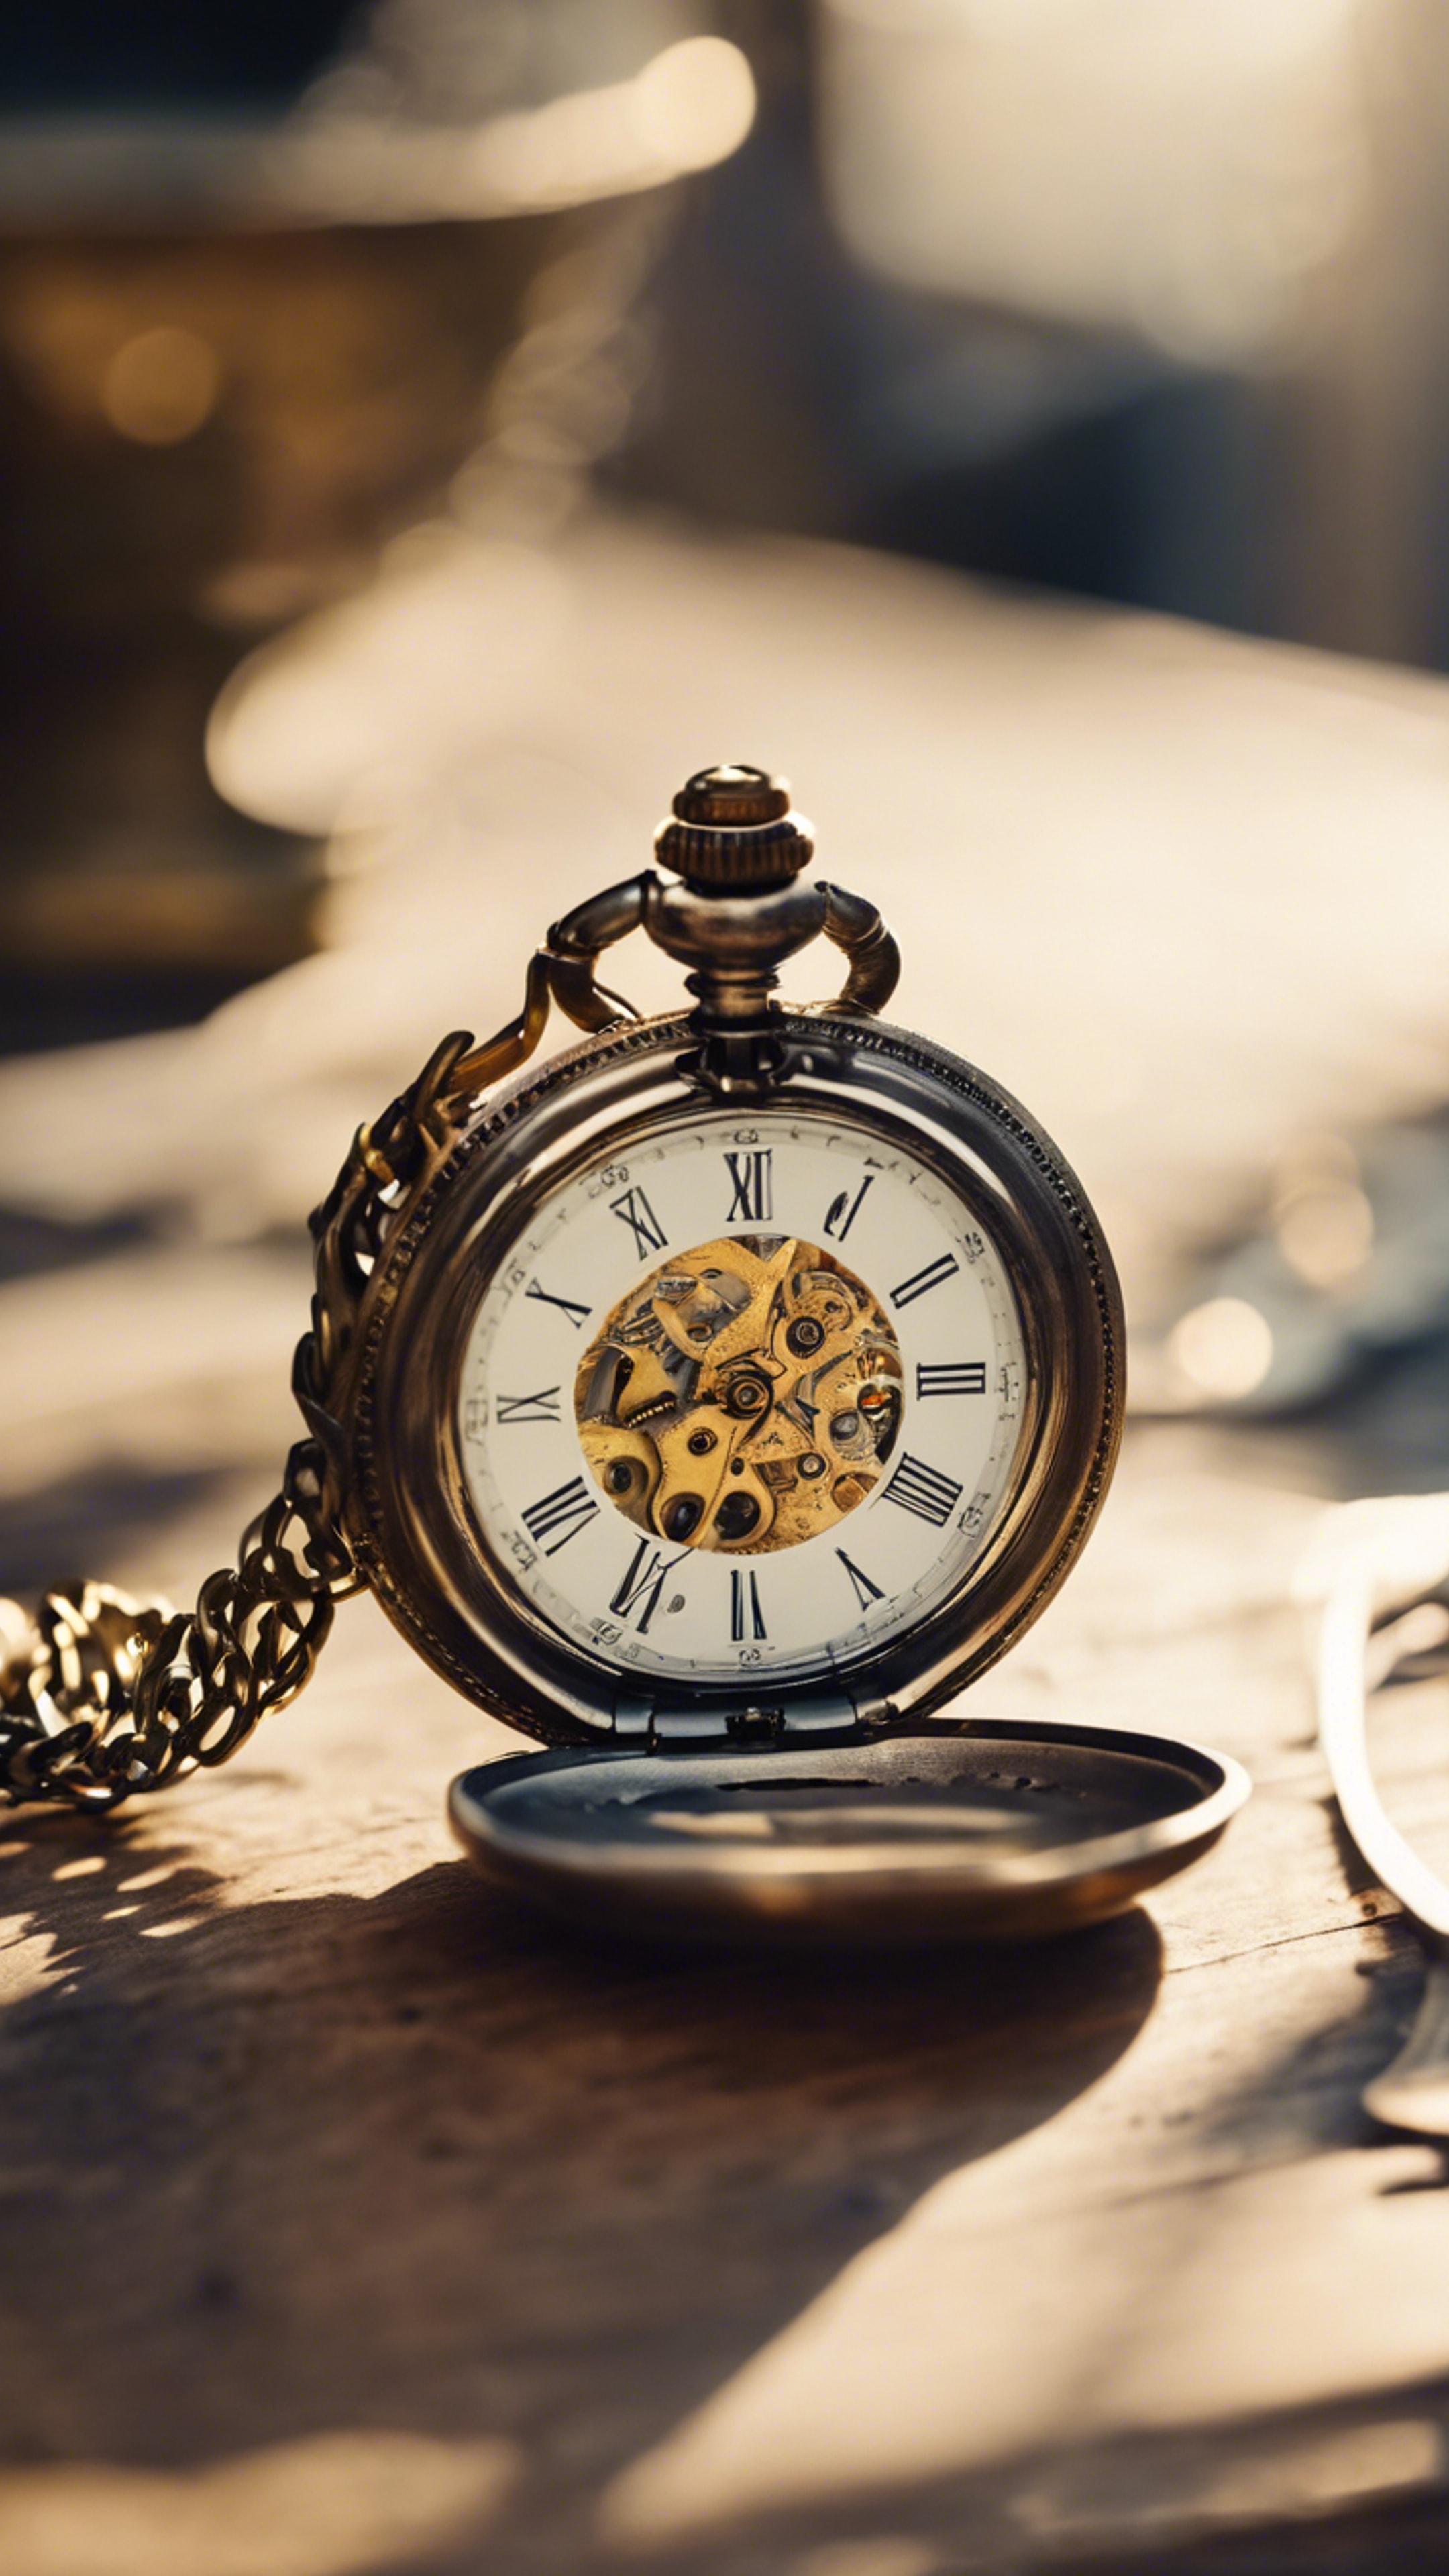 A vintage pocket watch, lying open on an antique table, reflecting the golden rays of afternoon sun. 墙纸[0f0622e1f4f2468db79b]